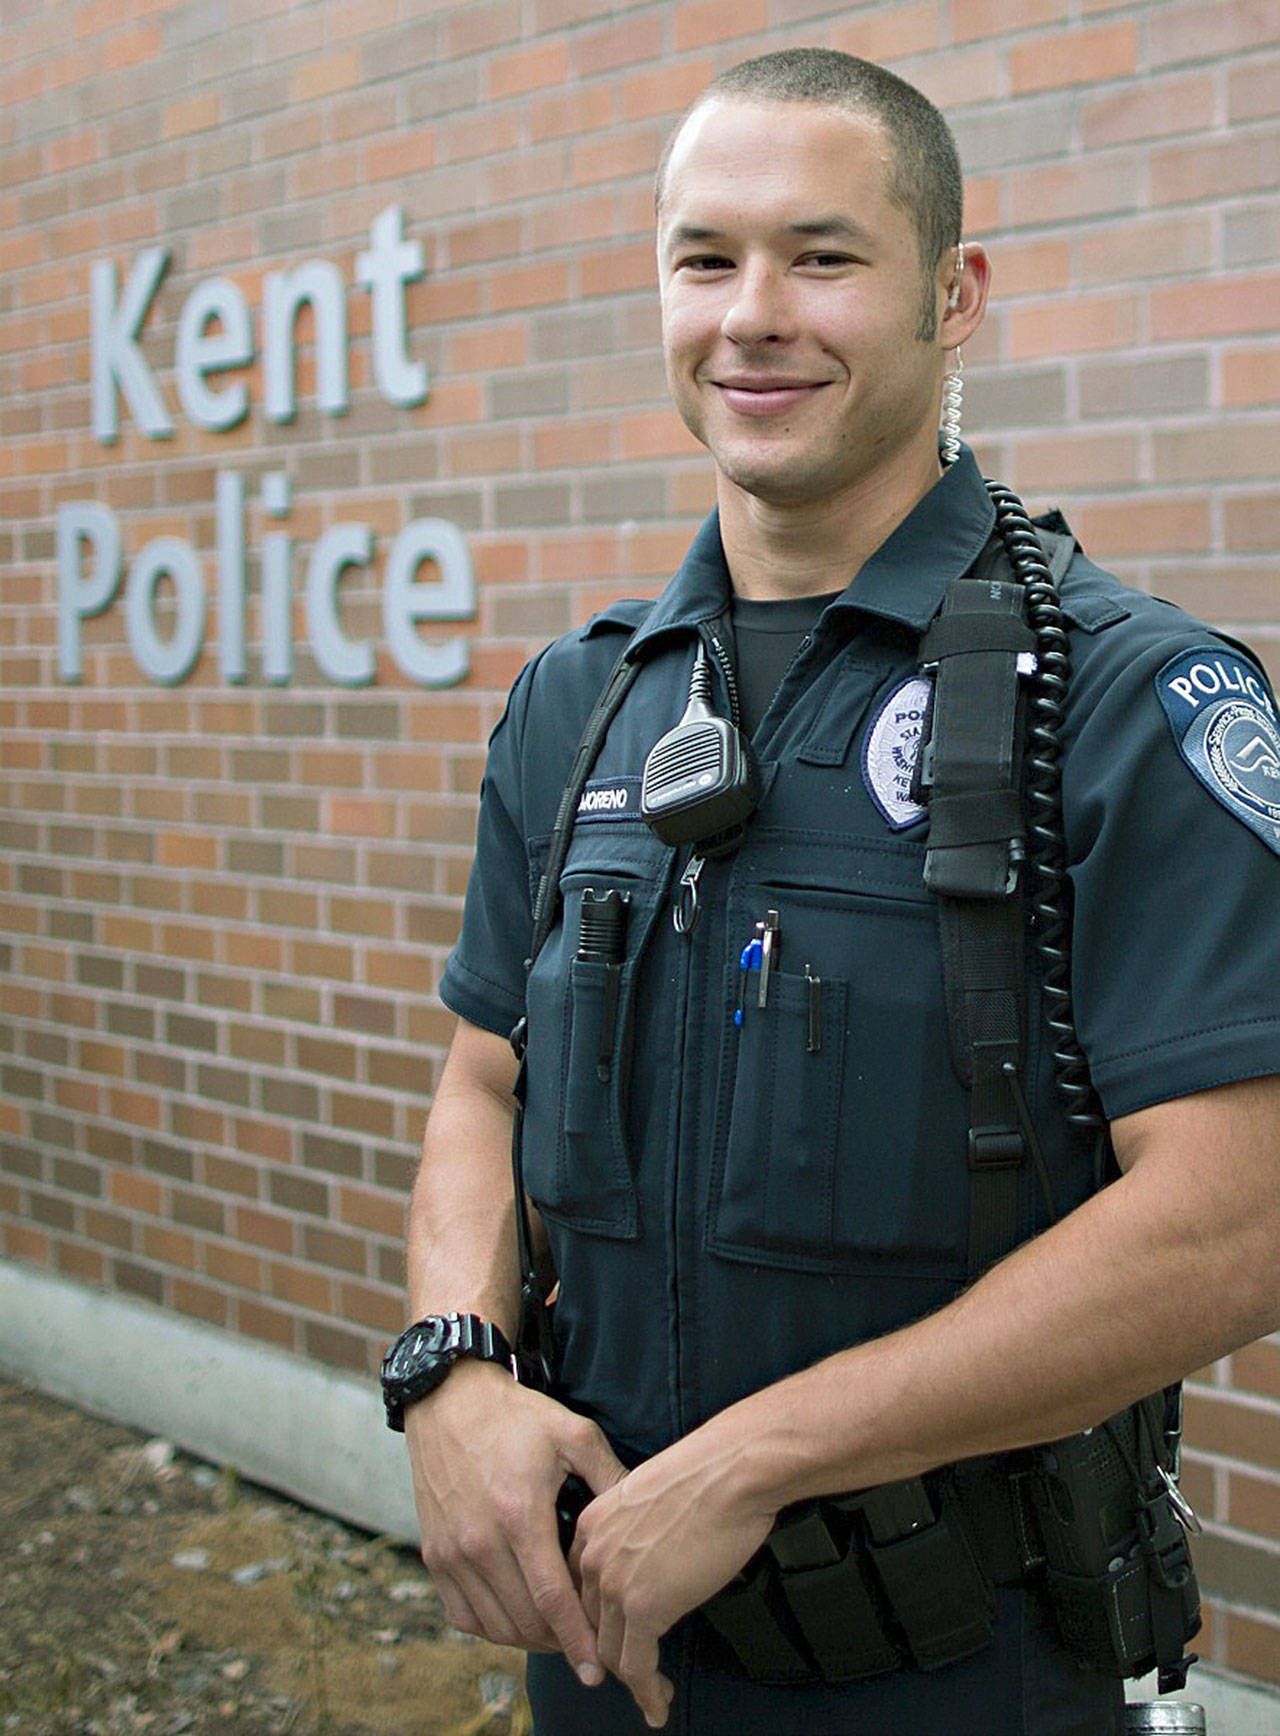 Kent Police Officer Diego Moreno was a decorated cop who saved lives and helped many others in the community he served. COURTESY PHOTO, city of Kent